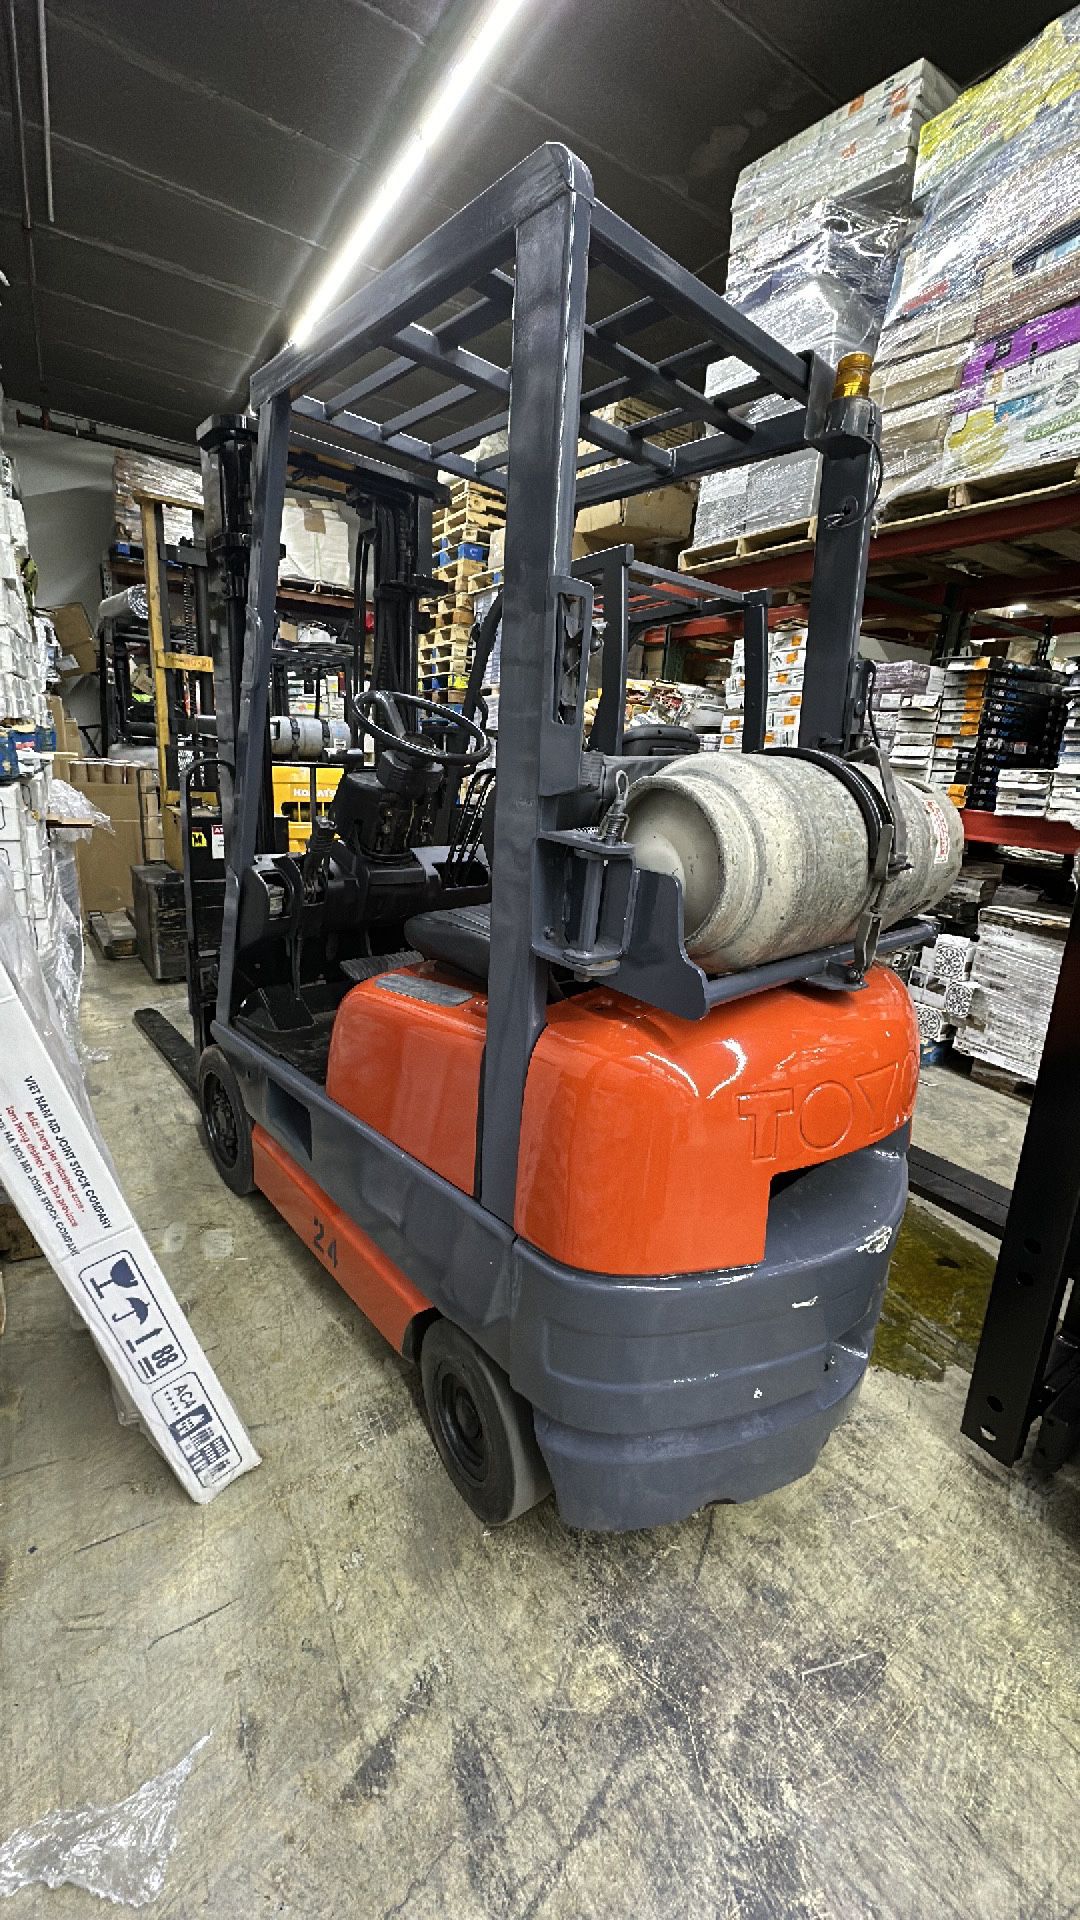 FORKLIFTS 2-3 stages, pneumatic tires, 2000-7000 lb(Toyota, CAT, Nissan, Komatsu)